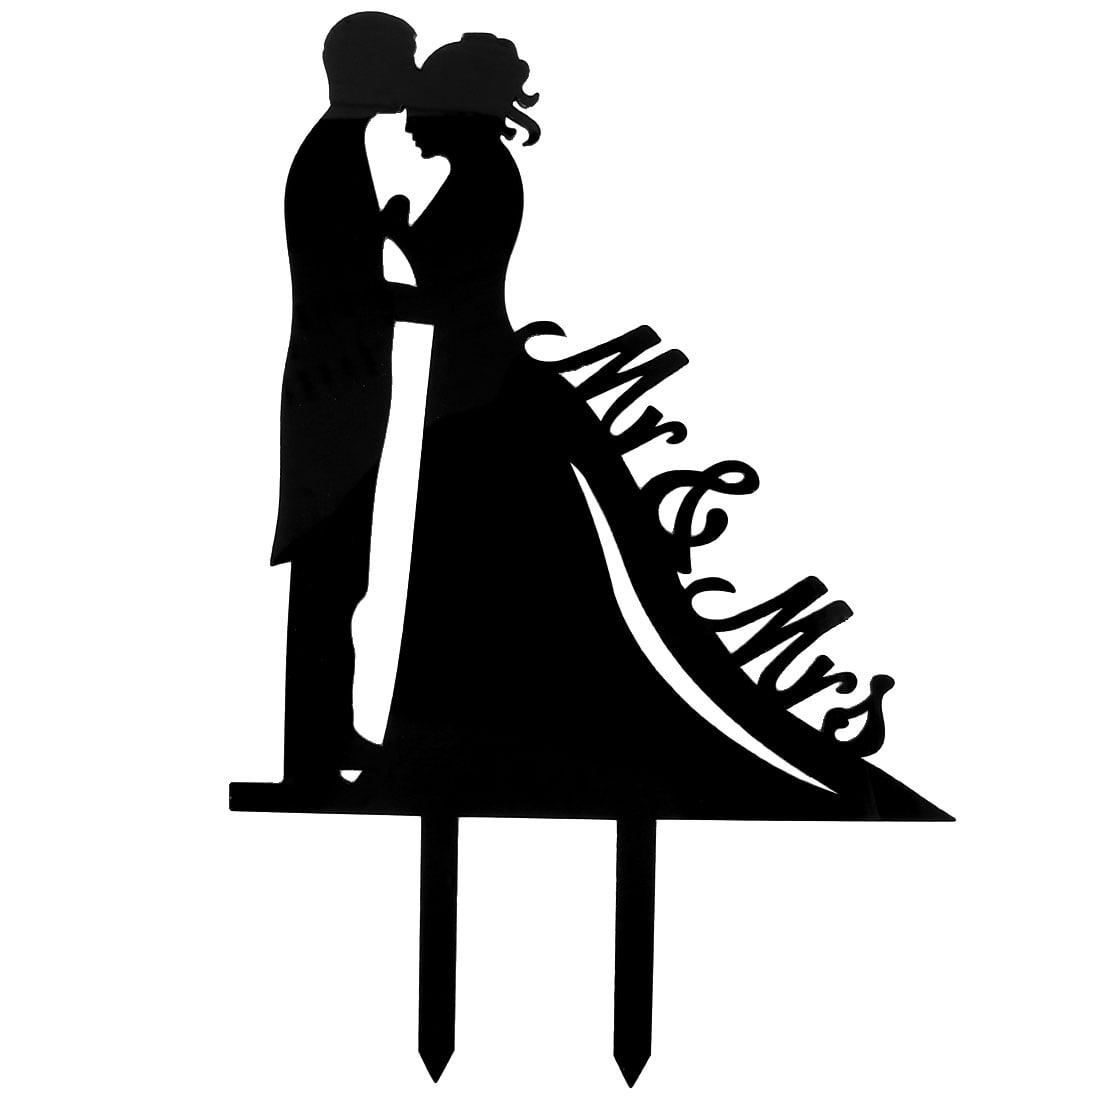 Gold Engagement Bride Groom Proposal Acrylic Wedding Day Cake Topper Silhouette 